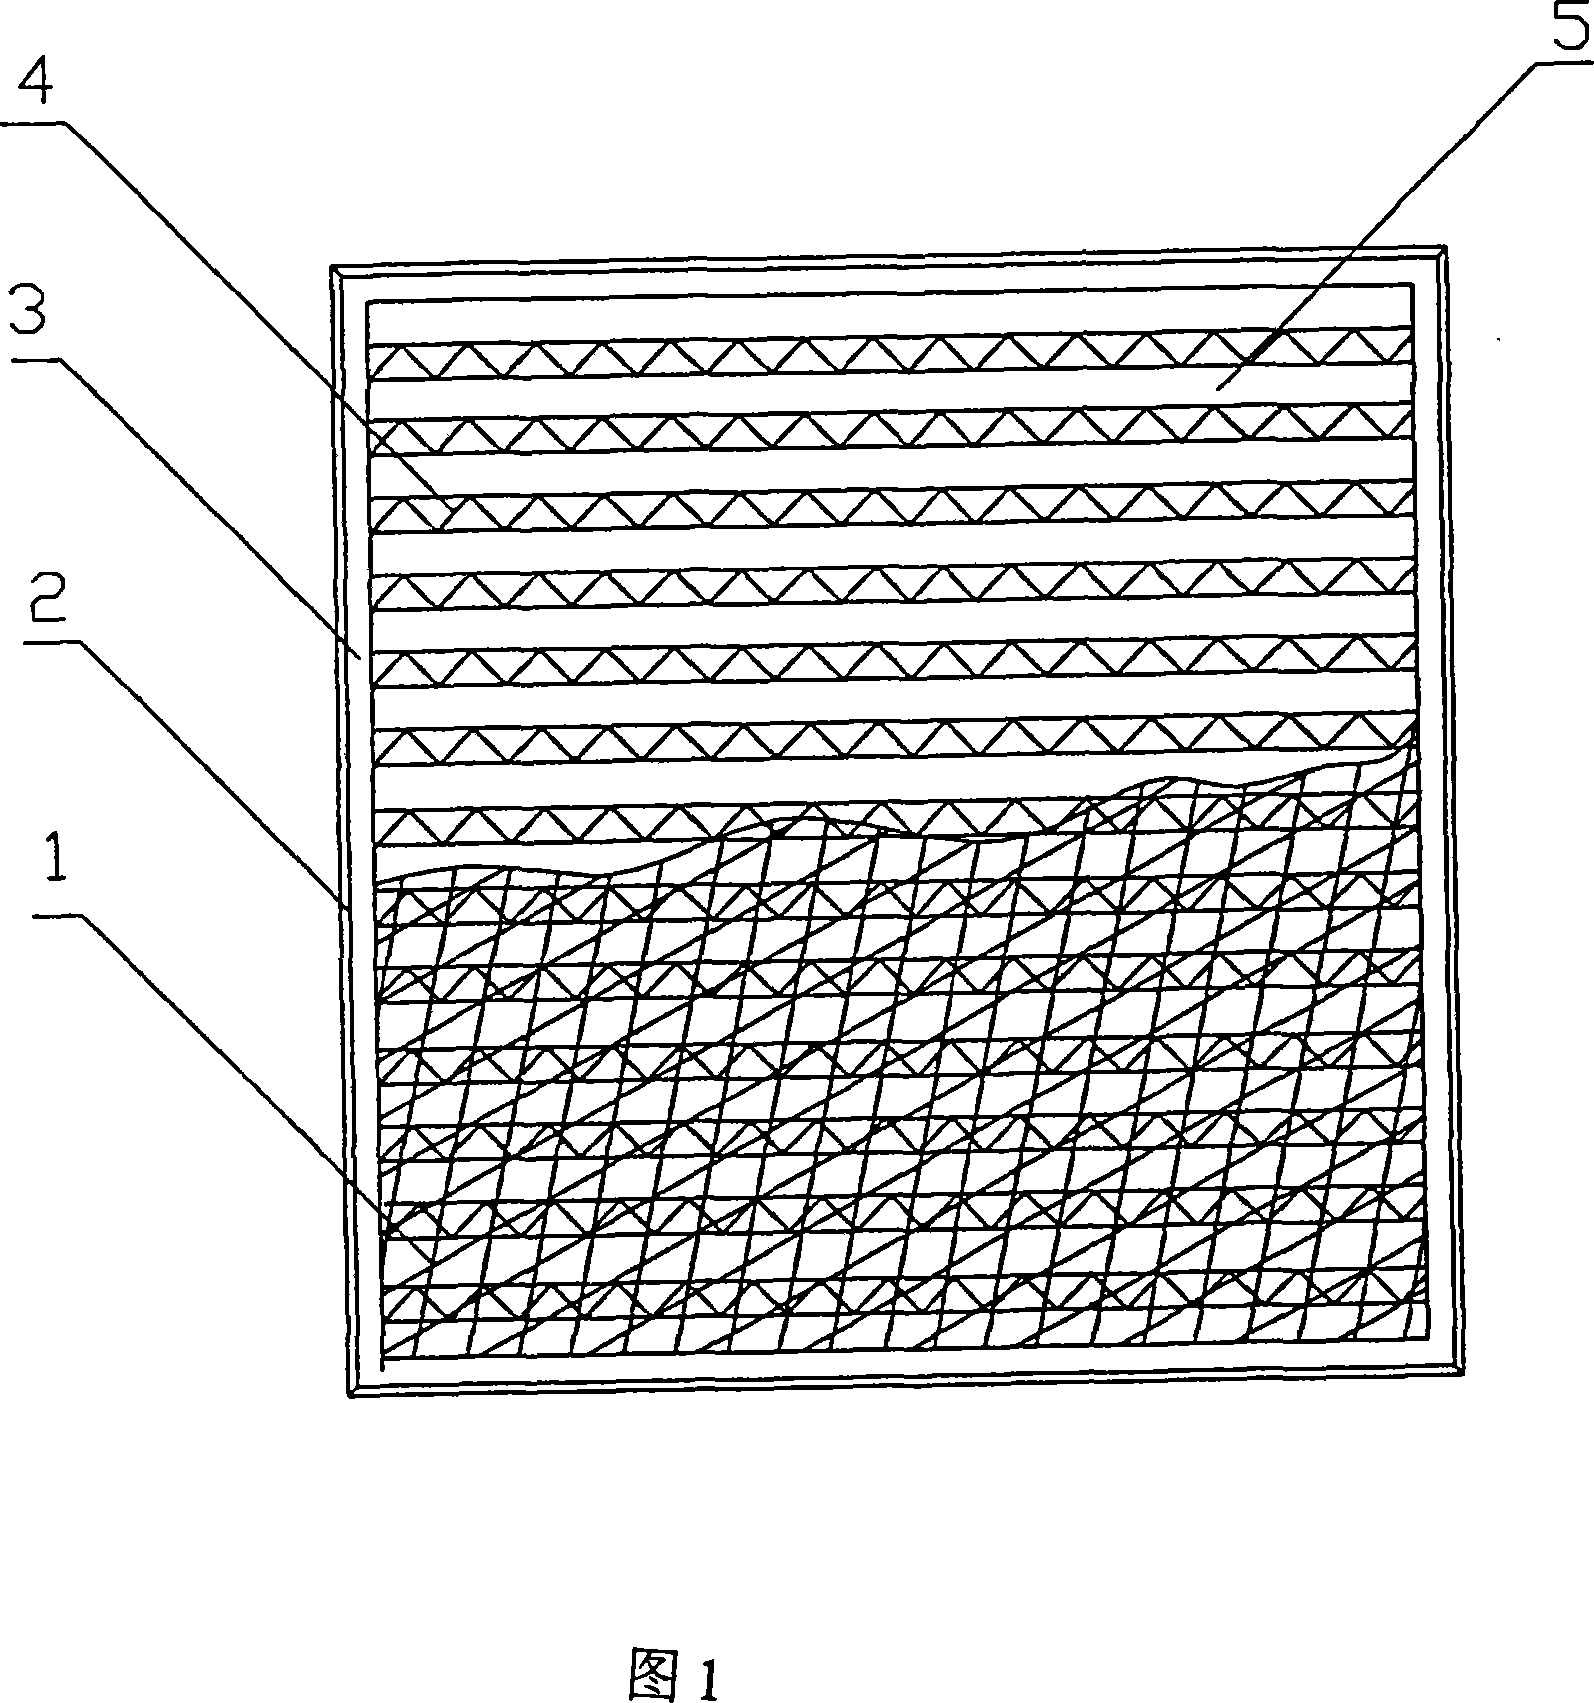 Baffle plate box type filter element in use for pulse self-cleaning type air filter